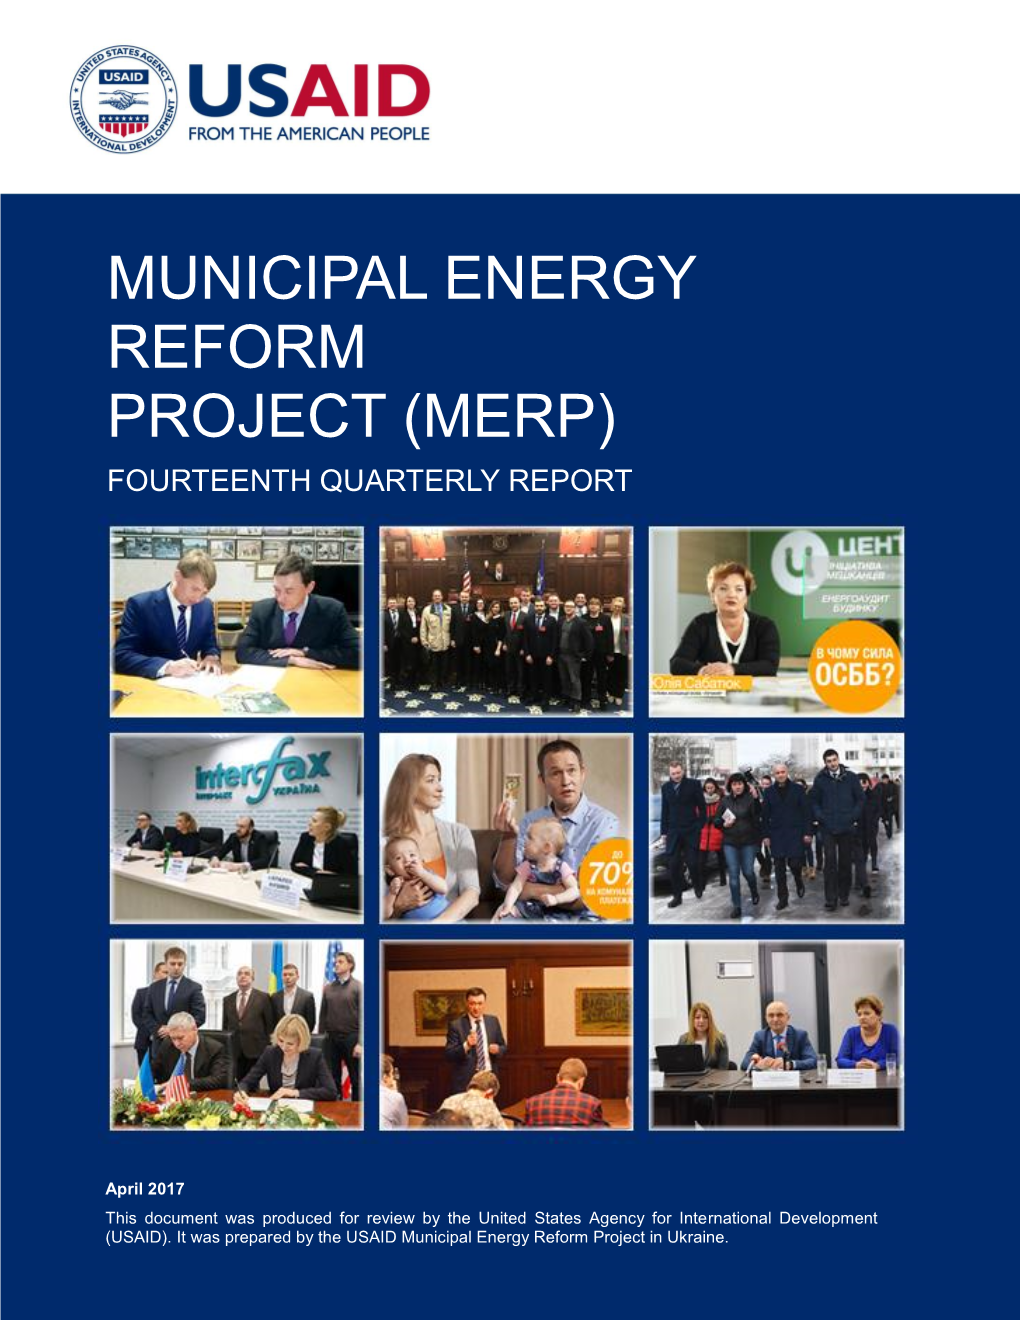 Municipal Energy Reform Project (Merp) Fourteenth Quarterly Report January 1 – March 31, 2017